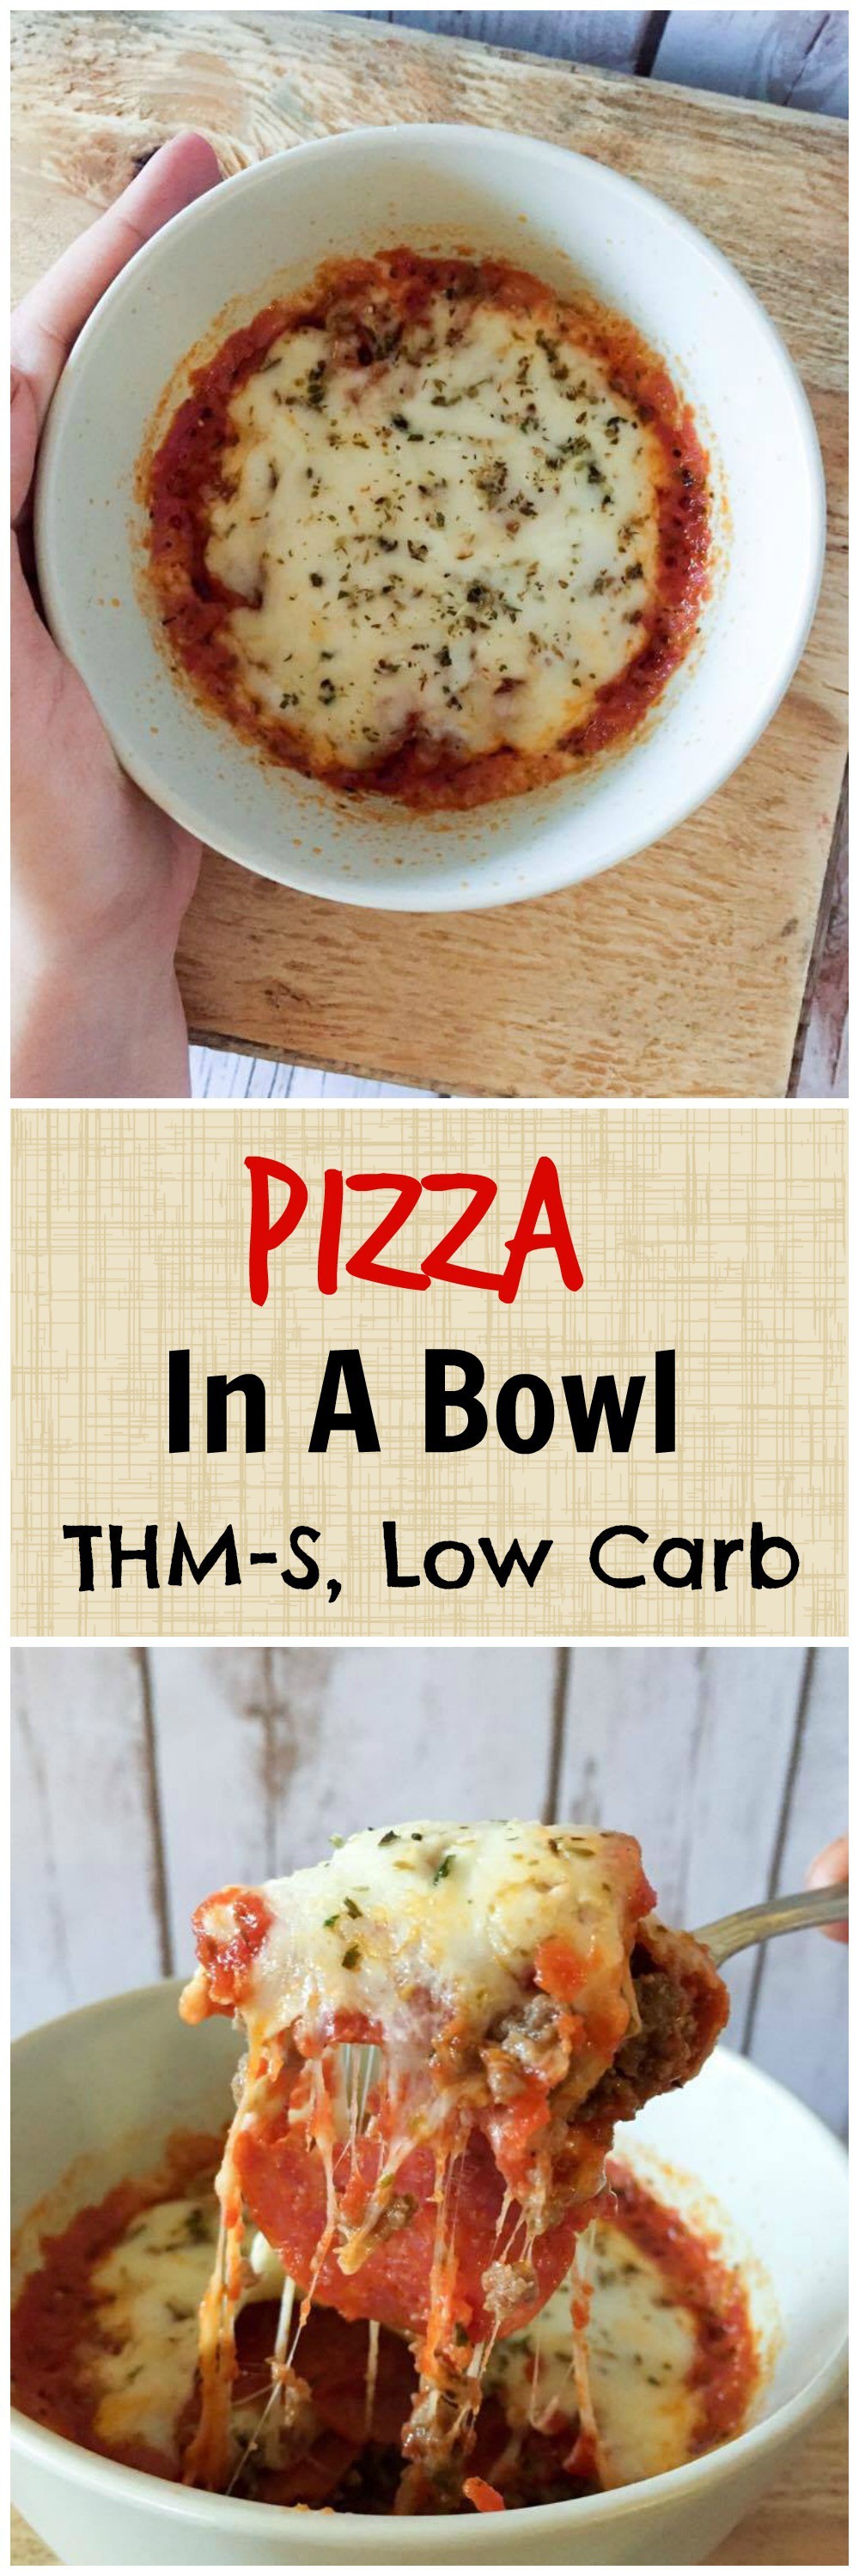 Keto Pizza In A Bowl Low Carb Thm S Patricia Koenig Copy Me That